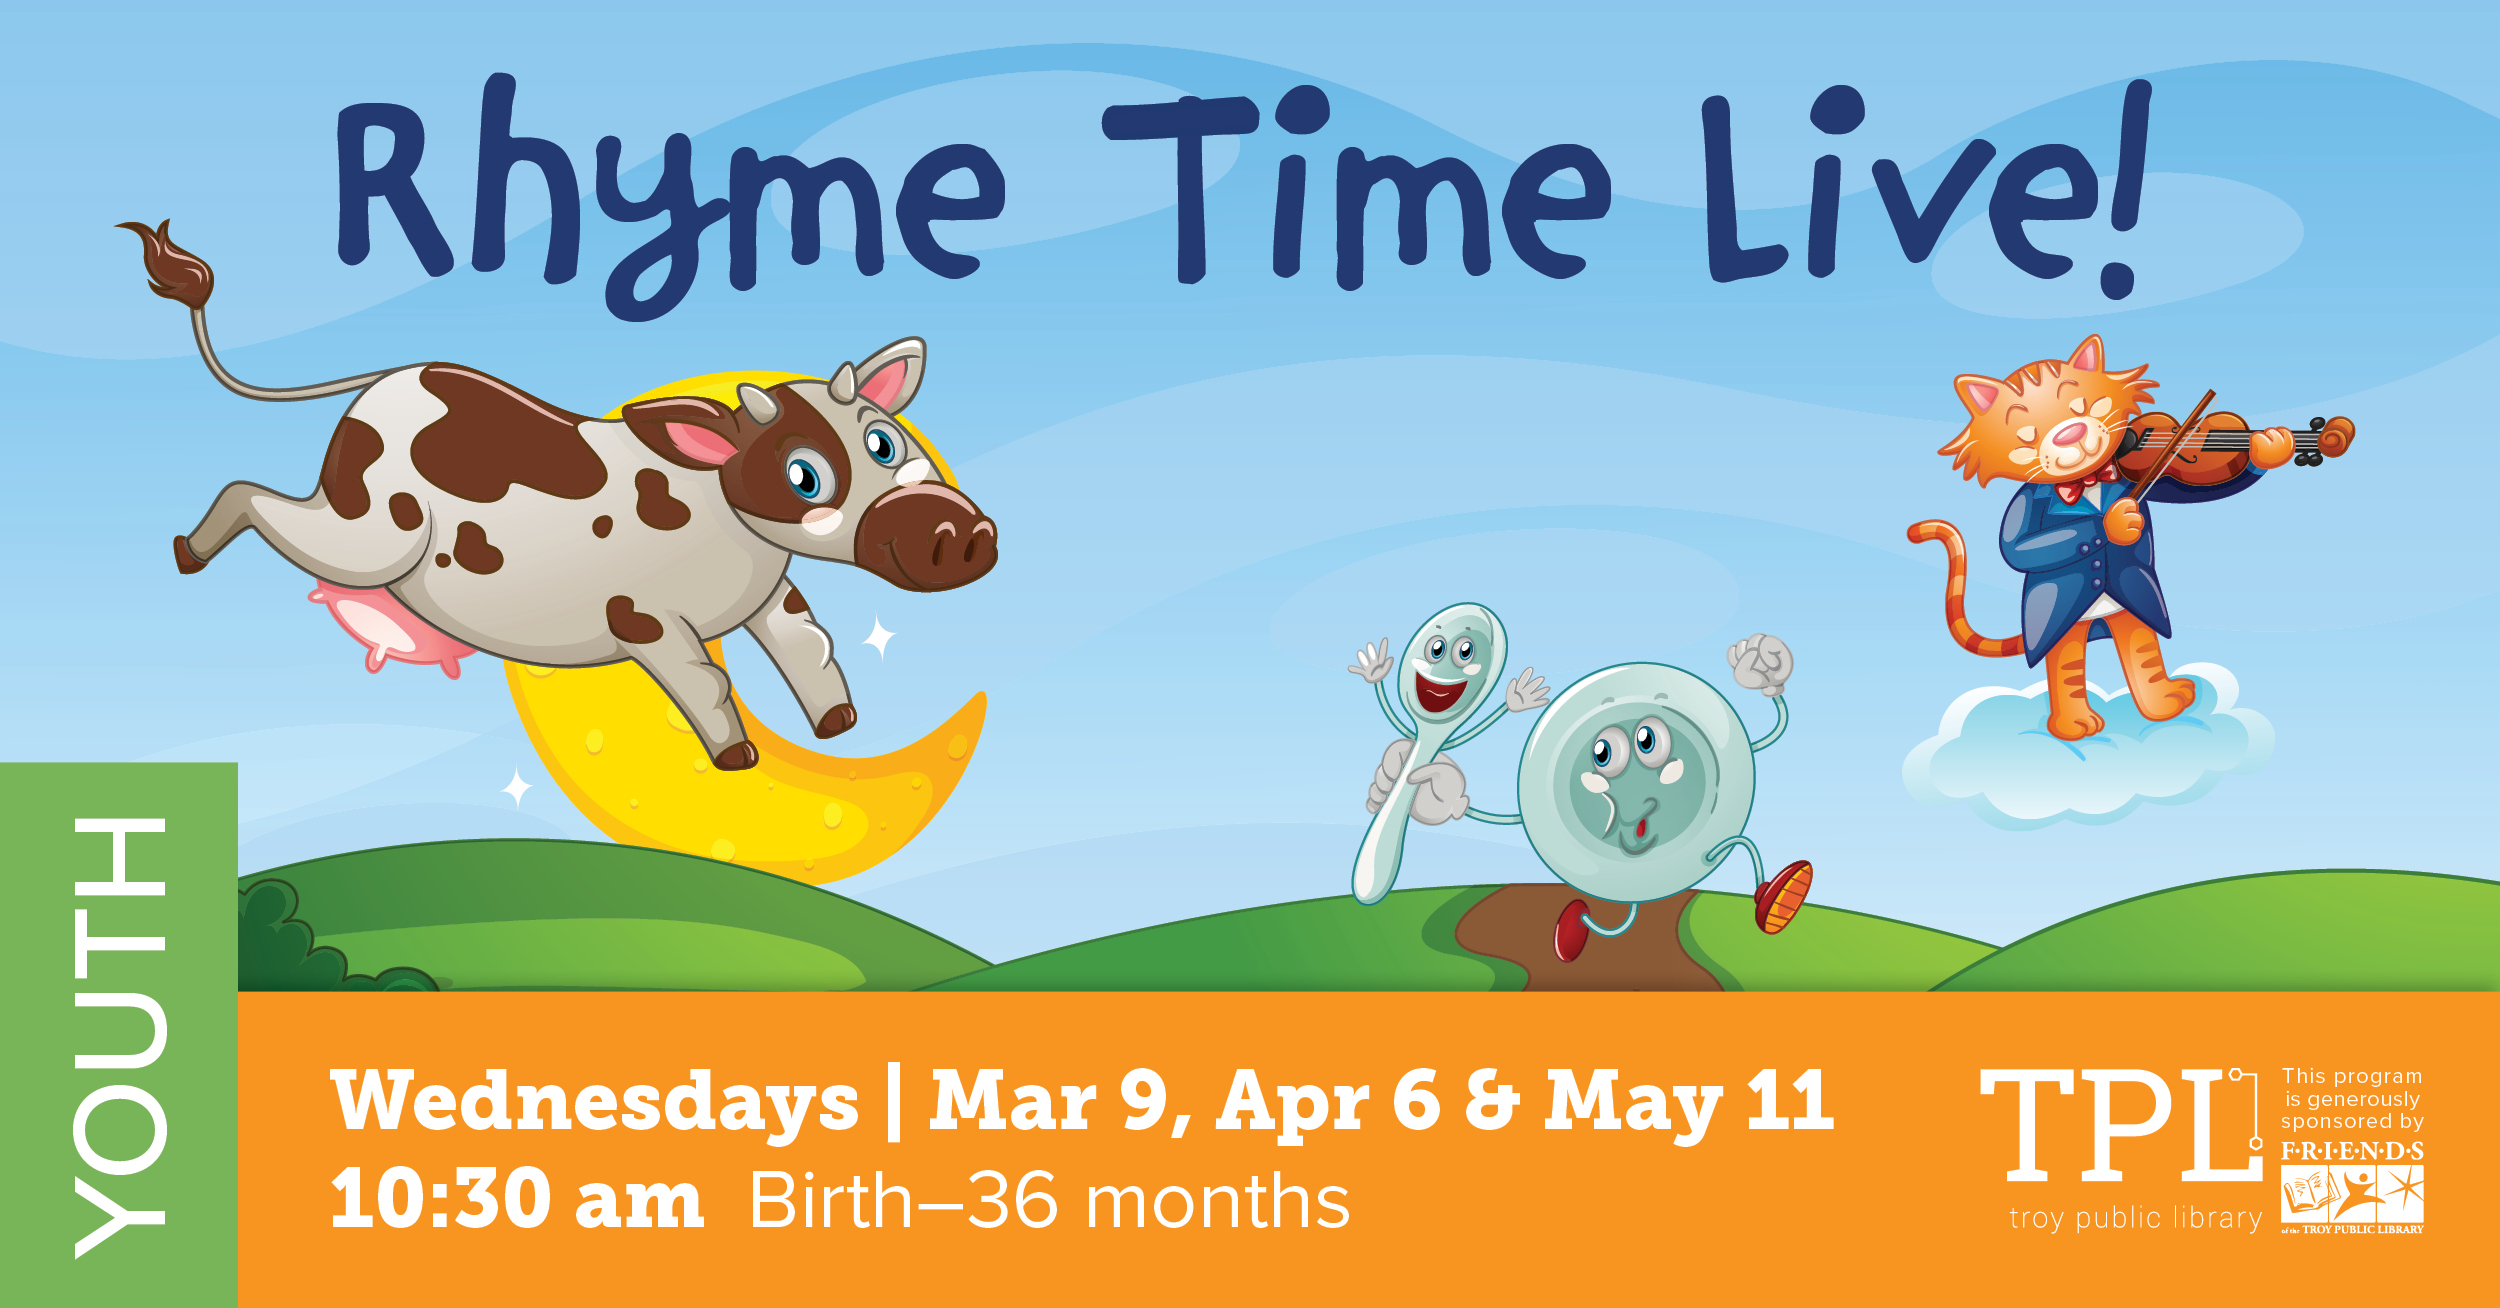 Rhyme Tim Live Wednesday March 9 10:30am Birth to 36 months